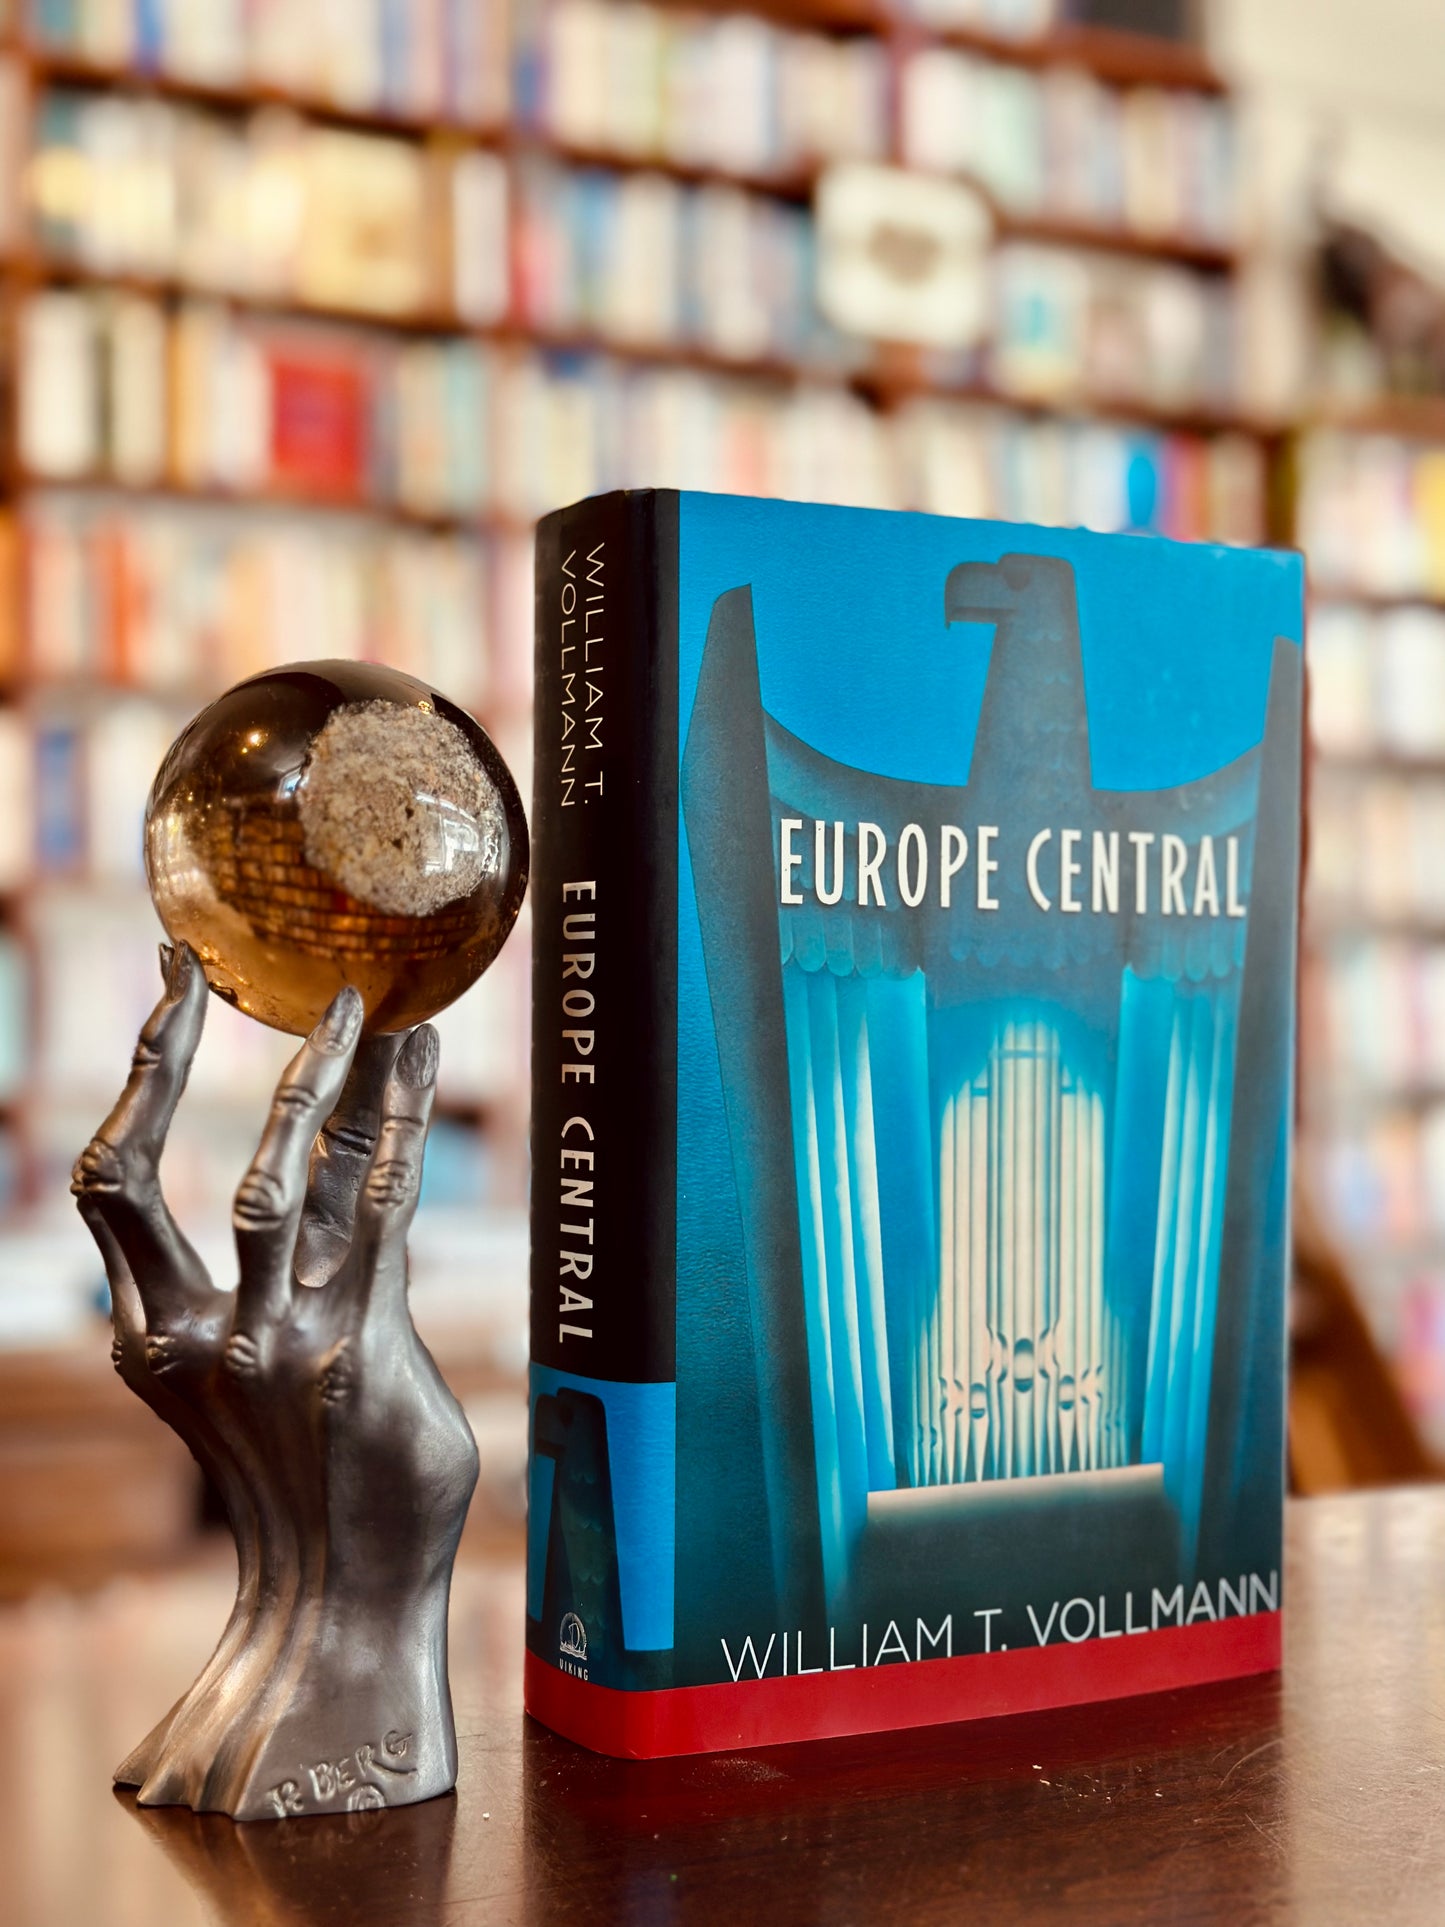 Europe Central by William T. Vollmann (First Edition, Signed)